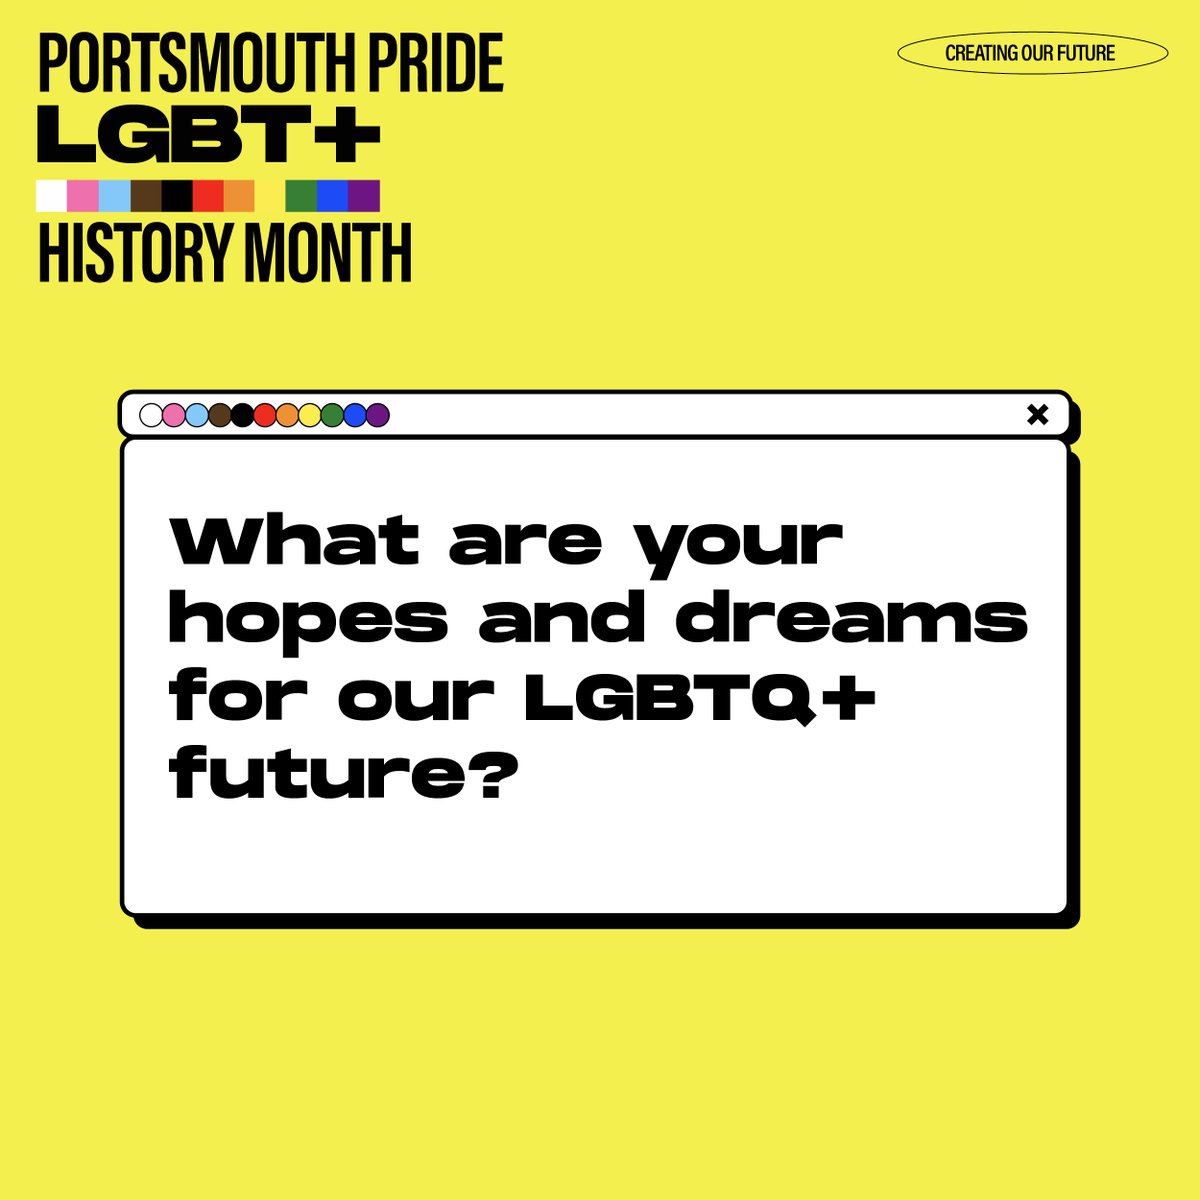 🌈We want to hear from you!

What are YOUR hopes and dreams for our LGBTQ+ future? What do you long to see? What dream would you love to make a reality? In Portsmouth, Hampshire, the UK, and beyond... DREAM BIG!
⬇️Let us know in the comments!

#LGBTplusHM #CreatingOurFuture